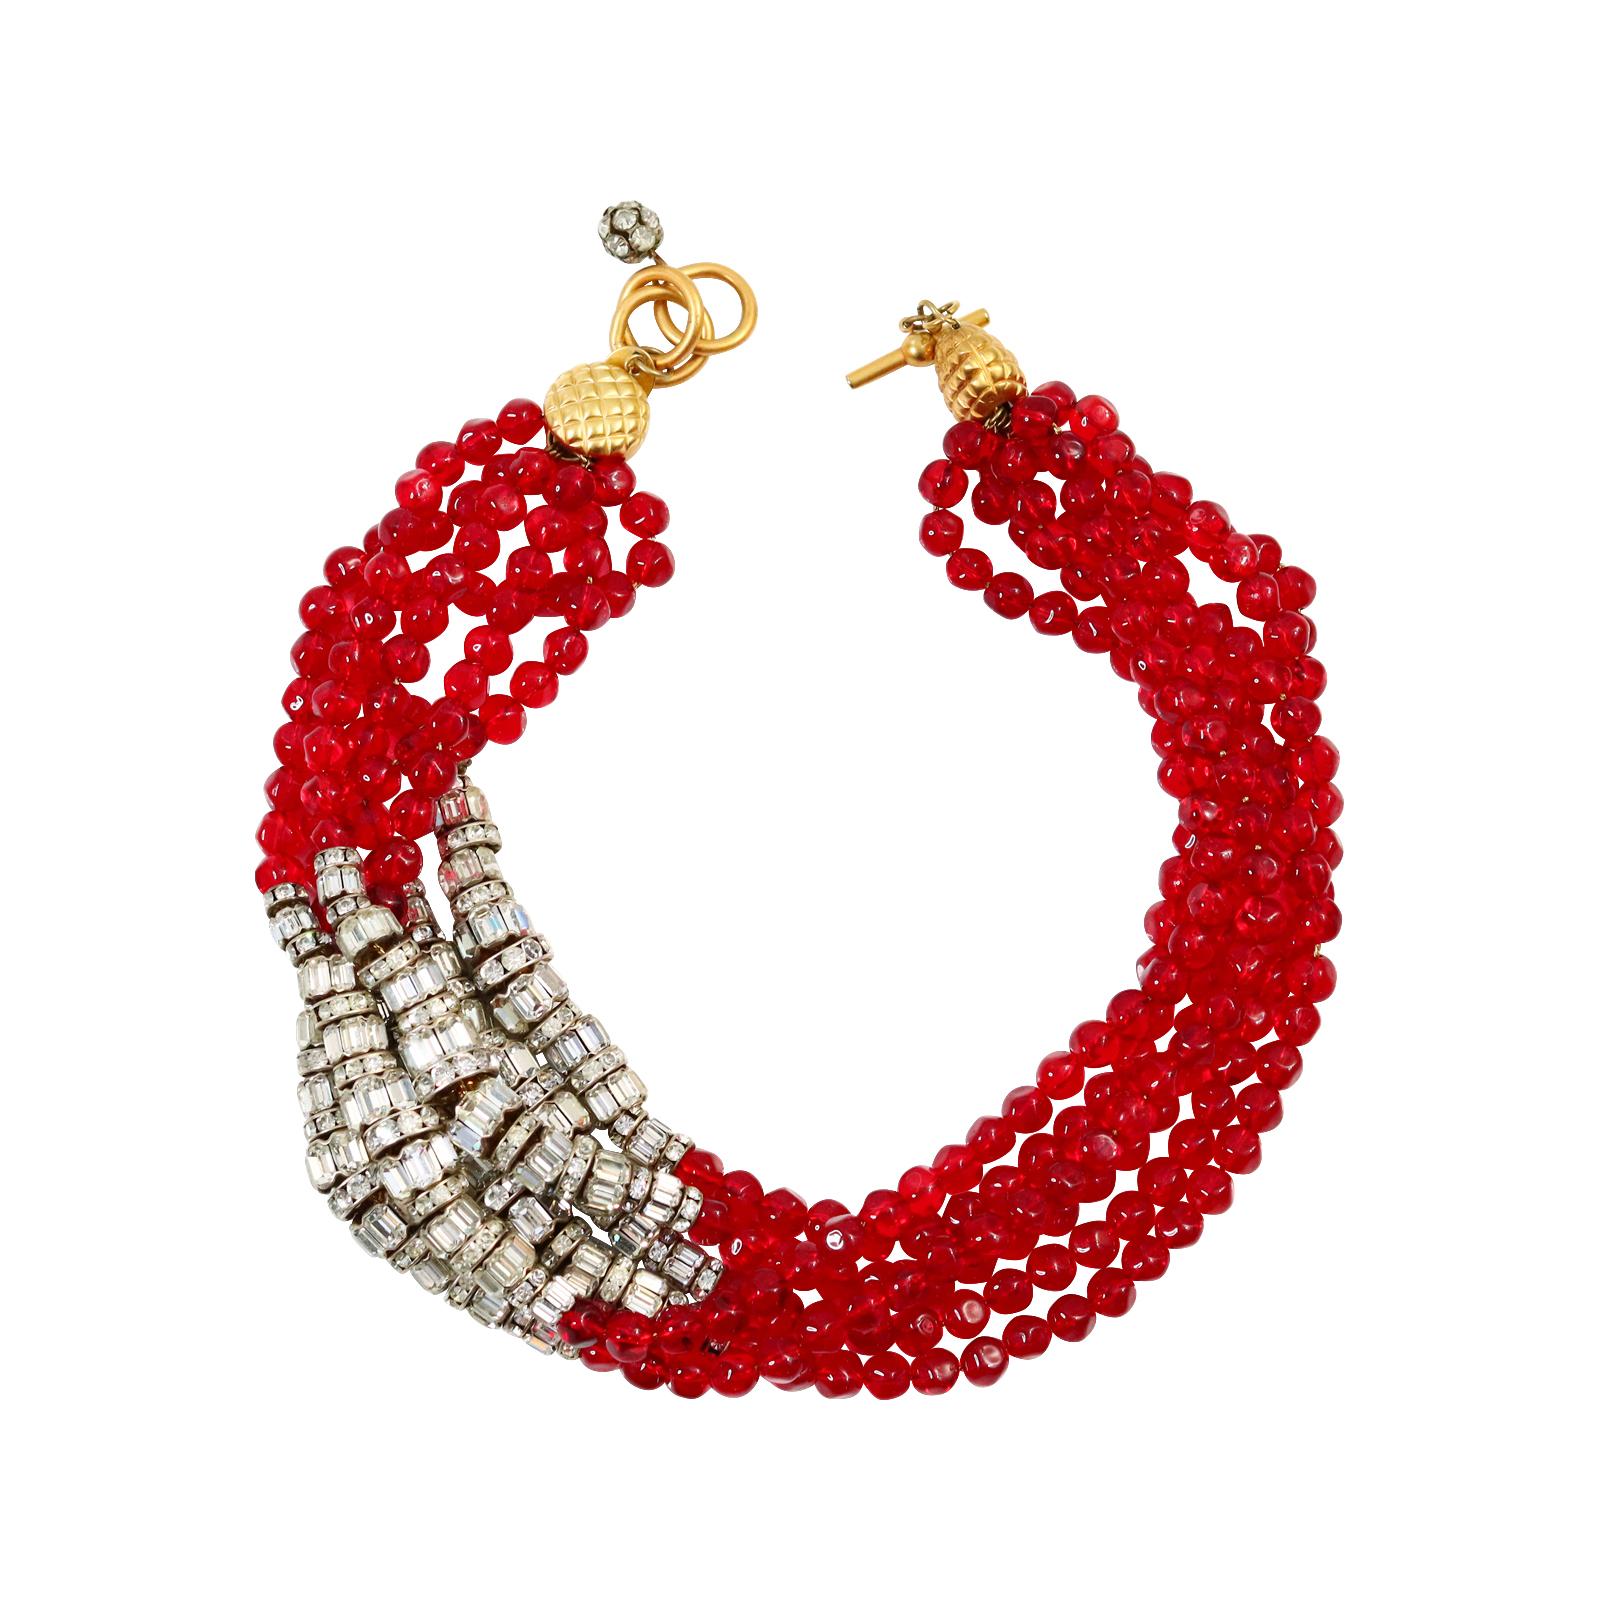 Modern Vintage Anne Klein Couture Red and Diamante Necklace Circa 1980s For Sale